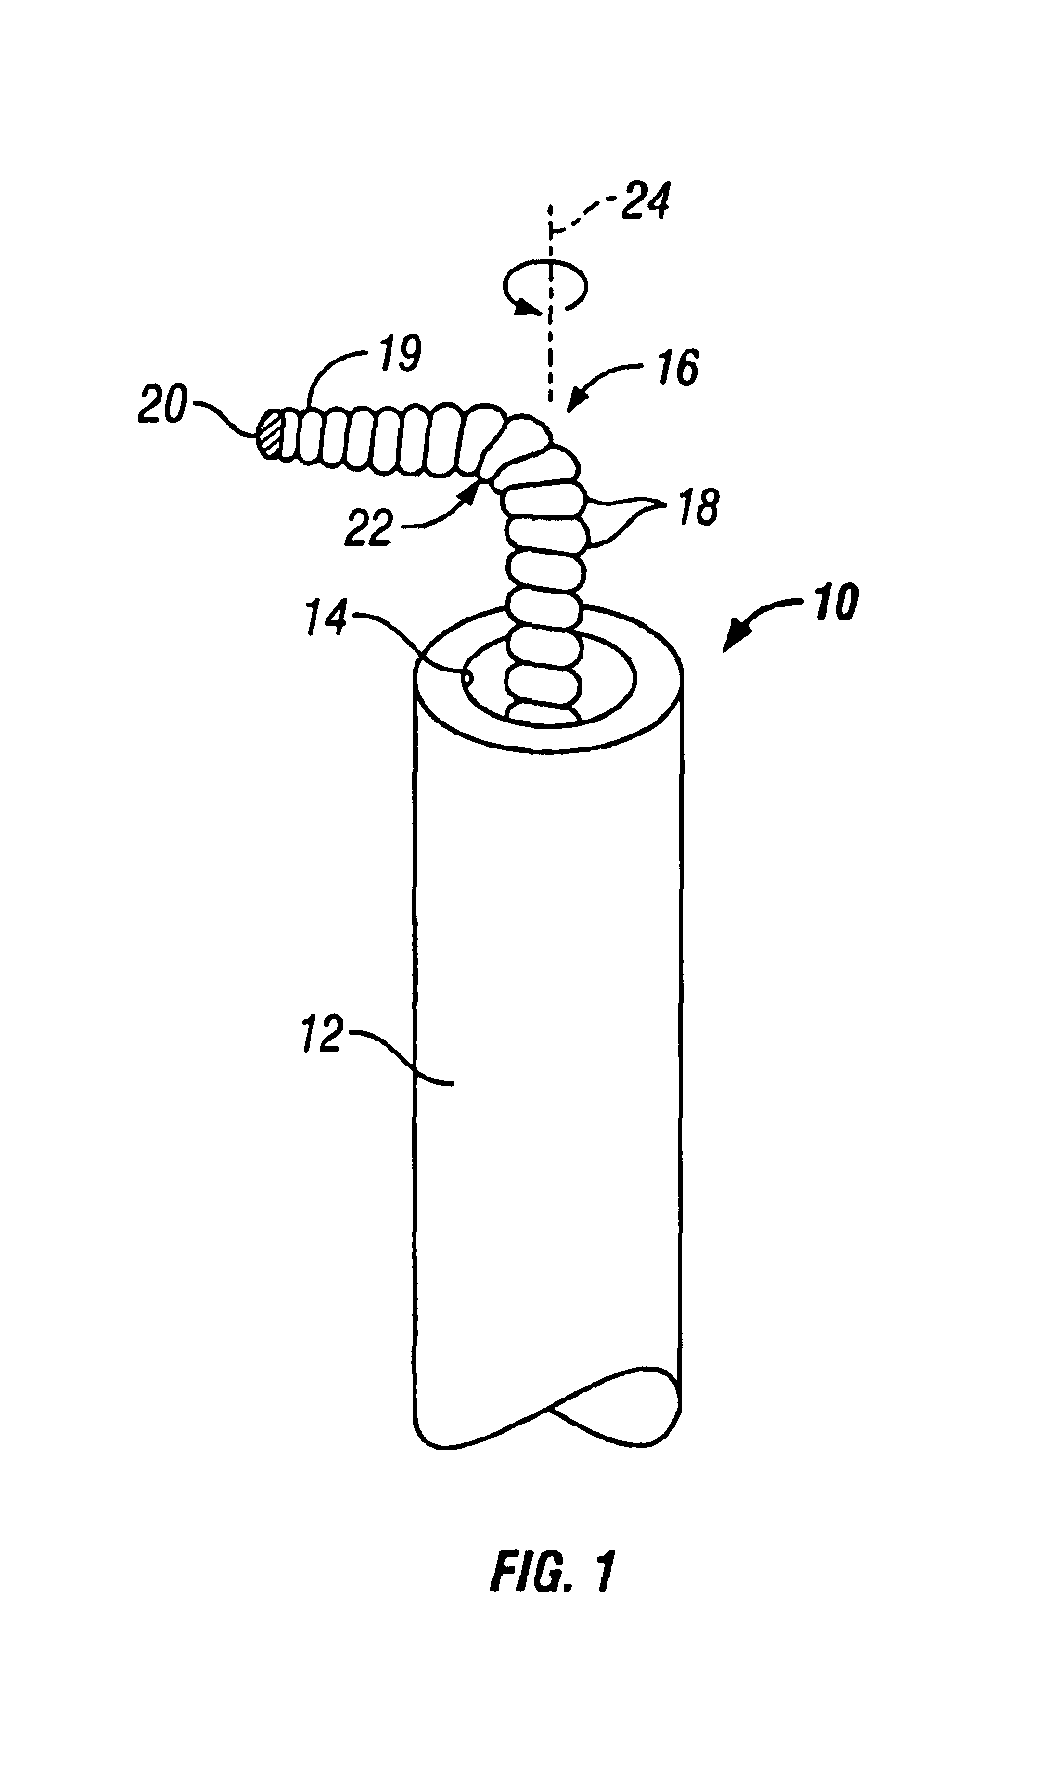 Device for sensing parameters of a hollow body organ